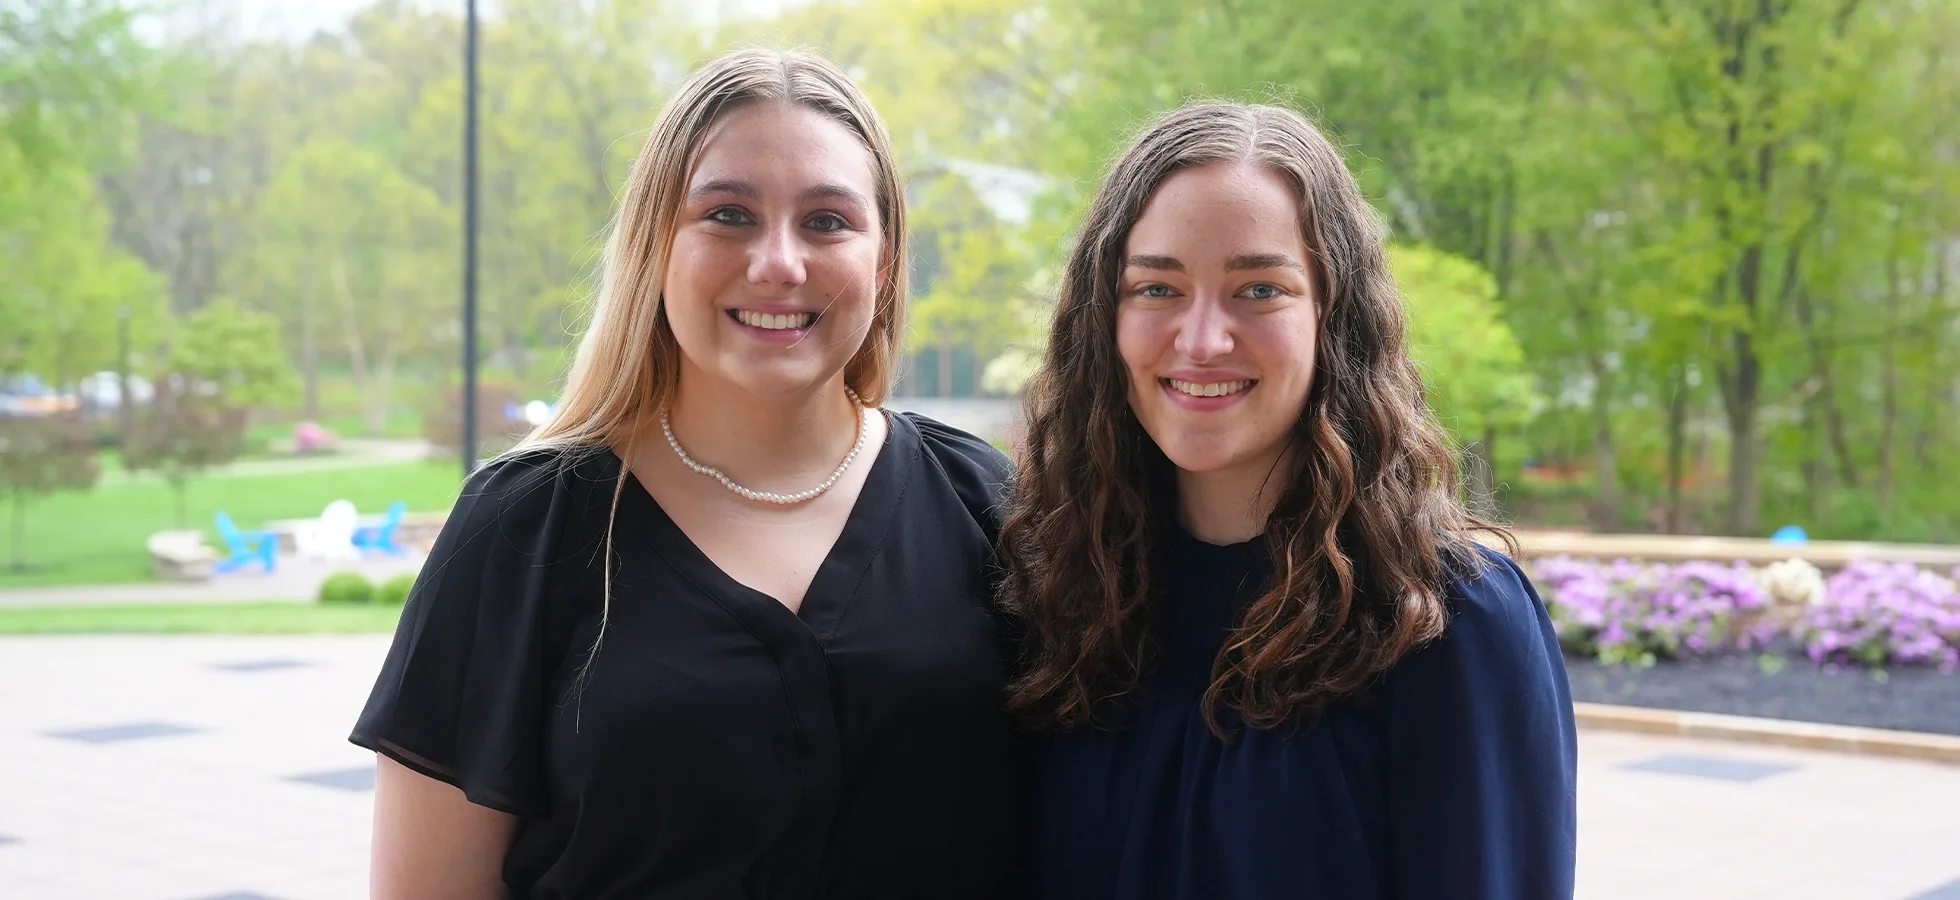 ></center></p><p>Assumption University has announced that Emily Fasteson, a Theology and Mathematics double major, has been named Valedictorian, and Shaeleigh Boynton, a Psychology major, has been named Salutatorian for the Class of 2024. </p><p>At the Commencement ceremony on May 12, Fasteson will deliver the Valedictory Address, and Boynton will introduce the Commencement speaker for this year’s ceremony: Dr. Aaron Dominguez , Provost of the Catholic University of America and Physics Professor. </p><p>Fasteson is from Seekonk, Massachusetts, and is a member of multiple on-campus organizations. She is a head tutor in the Academic Support Center, a student leader in Campus Ministry, and a member of the Theology Club. At this year’s Honors Convocation , Fasteson received Departmental Major Awards in Mathematics and Theology, the Ray Marion Award in recognition of outstanding academic performance, and the Donec Formetur Christus Presidential Award. </p><p>Following her graduation from Assumption, Fasteson will attend the University of Notre Dame, where she will pursue her Master’s degree in systematic theology. This program is fully funded, with a stipend, and only accepts 20 students per year, with a 10-15% acceptance rate, according to Assumption Theology Professor Rachel Coleman. </p><p>“This honor speaks to the transformative power of a Catholic liberal education. I have been shaped both personally and intellectually by my Assumption education,” Fasteson said. “When I first came to Assumption, I had a clear plan for my life. However, in taking seriously the questions my professors asked me to grapple with in my courses, I developed a wider and richer understanding of reality, causing me to shift my original focus and pursue a theology major in addition to my existing major in mathematics.”</p><p>Boynton is from Wrentham, Massachusetts, and is the President of the Psychology Club. She is also an active member of Psi Chi , the International Honor Society in Psychology. At this year’s Honors Convocation, Boynton received the Departmental Major Award in Psychology with a Concentration in Child and Adolescent Development. </p><p>Following her graduation from Assumption, Boynton will remain at the University, having been accepted to pursue her Master’s degree in Applied Behavior Analysis . She will begin her graduate studies this fall. </p><p>“To stand on stage during Commencement and look out to see my fellow Class of 2024 Hounds is the greatest honor imaginable,” Boynton said. “We have come so far together, and the sight of everyone wearing their graduation caps and gowns will be a moment that stays with me forever.” </p><p>“My success can be attributed to the support of the community around me,” Boynton continued. “I am forever grateful for the opportunities and experiences that Assumption has provided for me over the last four years, and I am excited to continue my education on a graduate level in Applied Behavior Analysis here at Assumption University.”</p><p>Fasteson and Boynton were chosen for these honors by the Valedictorian and Salutatorian Committee, which consists of: </p><ul><li>Ms. Brenna Aylward, President of the Class of 2024</li><li>Ms. Jacqueline Chlapowski, Chair of the Commencement Committee</li><li>Dr. Eloise Knowlton, Associate Vice President of Academic Affairs (chair)</li><li>Mr. Noah Laren, Vice President of the Class of 2024</li><li>Dr. Frank Prior, Professor of Sociology</li><li>Dr. Christian Williams, Professor of Human Services</li></ul><h2>Related News</h2><p>Dr. lee trepanier appointed dean of d’amour college of liberal arts & sciences, assumption president greg weiner named to worcester business journal power 100 list.</p><p>The Worcester Business Journal (WBJ) announced on April 29 that Assumption President Greg Weiner has been named to their annual Power 100 list of the most influential business leaders in Worcester county.</p><h2>Five Finals Tips to Improve Your Study Habits</h2><p>Struggling to study for finals? Feeling distracted or burnt out from the semester? Or feeling stressed about getting that one grade in that class? Have no fear, I have 5 tips for you to get through the final stretch!  </p><p><center><a href=